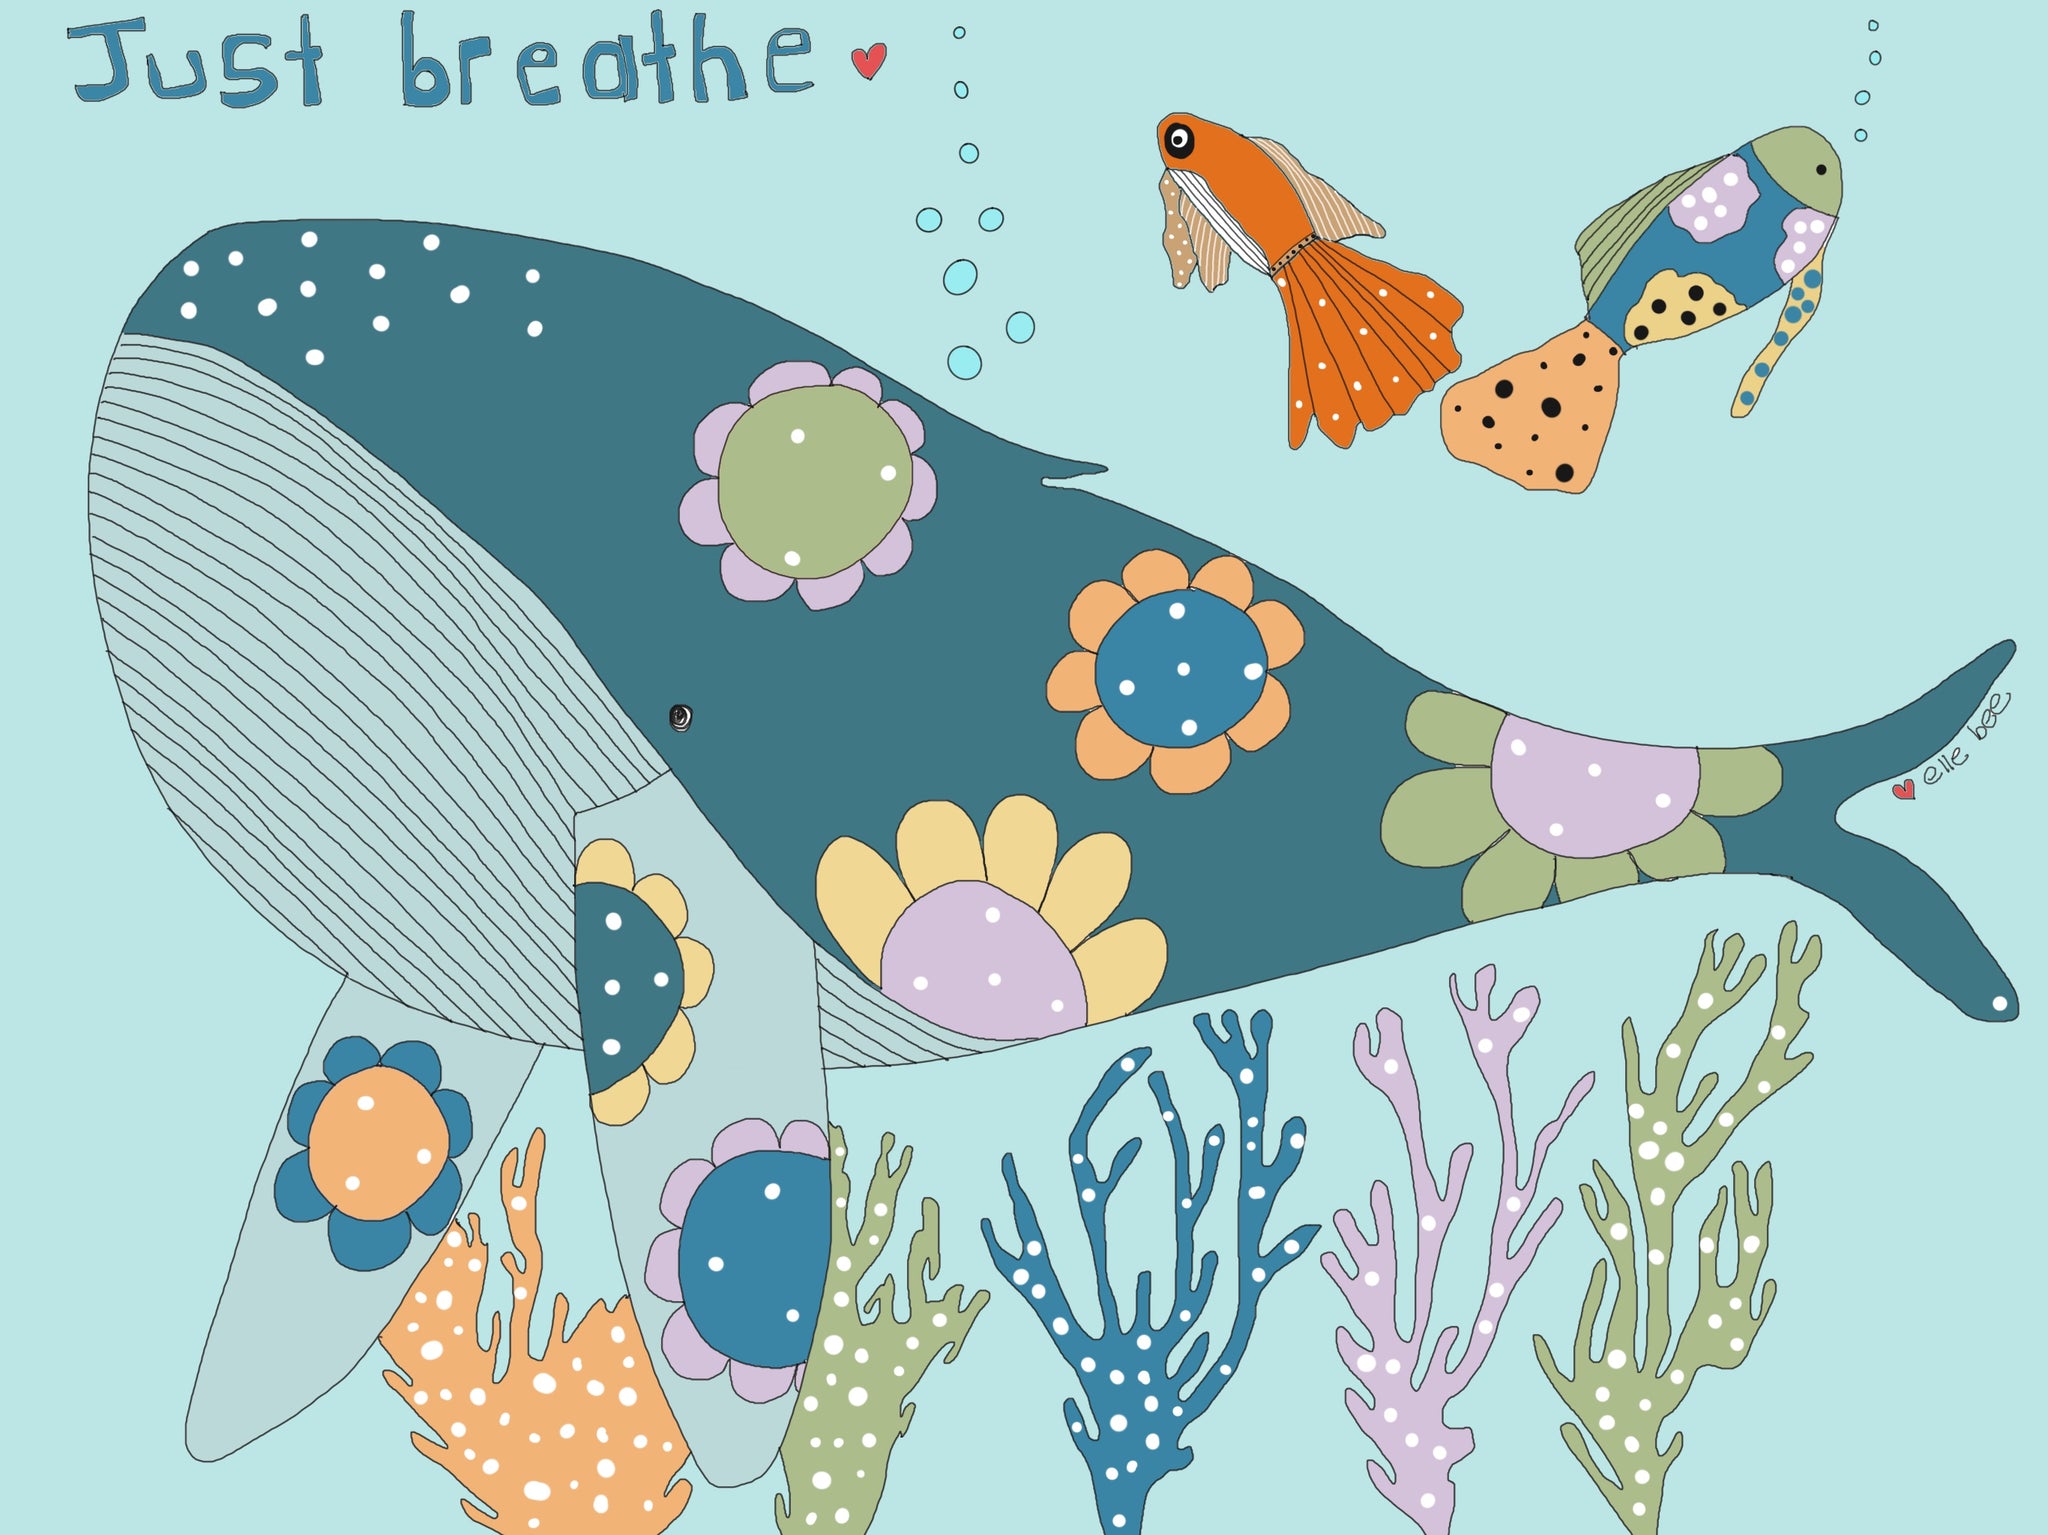 Greeting card "Just breathe"